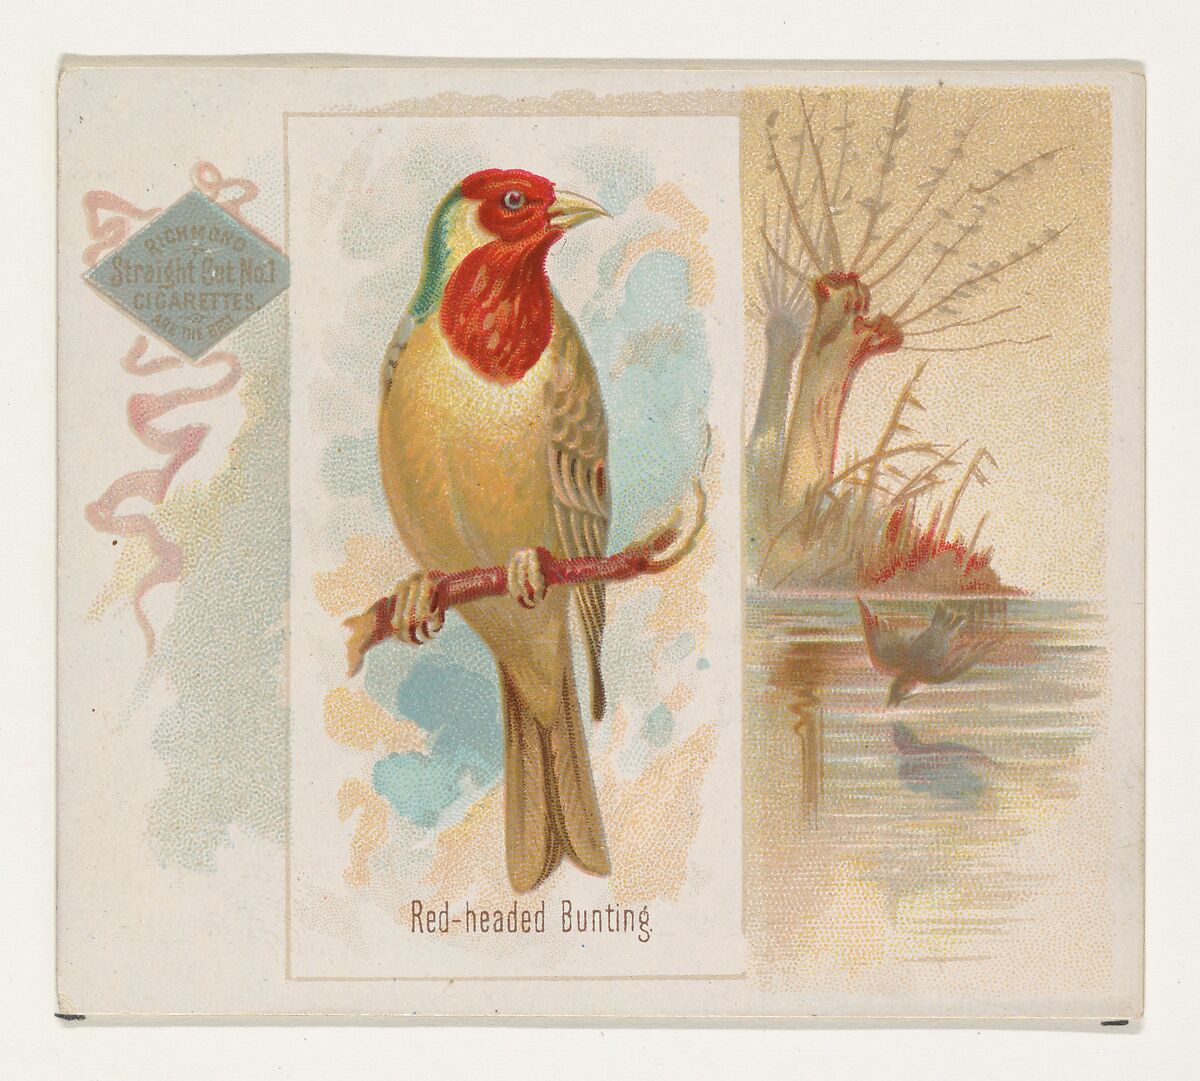 Red-headed Bunting, from the Song Birds of the World series (N42) for Allen & Ginter Cigarettes, Issued by Allen &amp; Ginter (American, Richmond, Virginia), Commercial color lithograph 